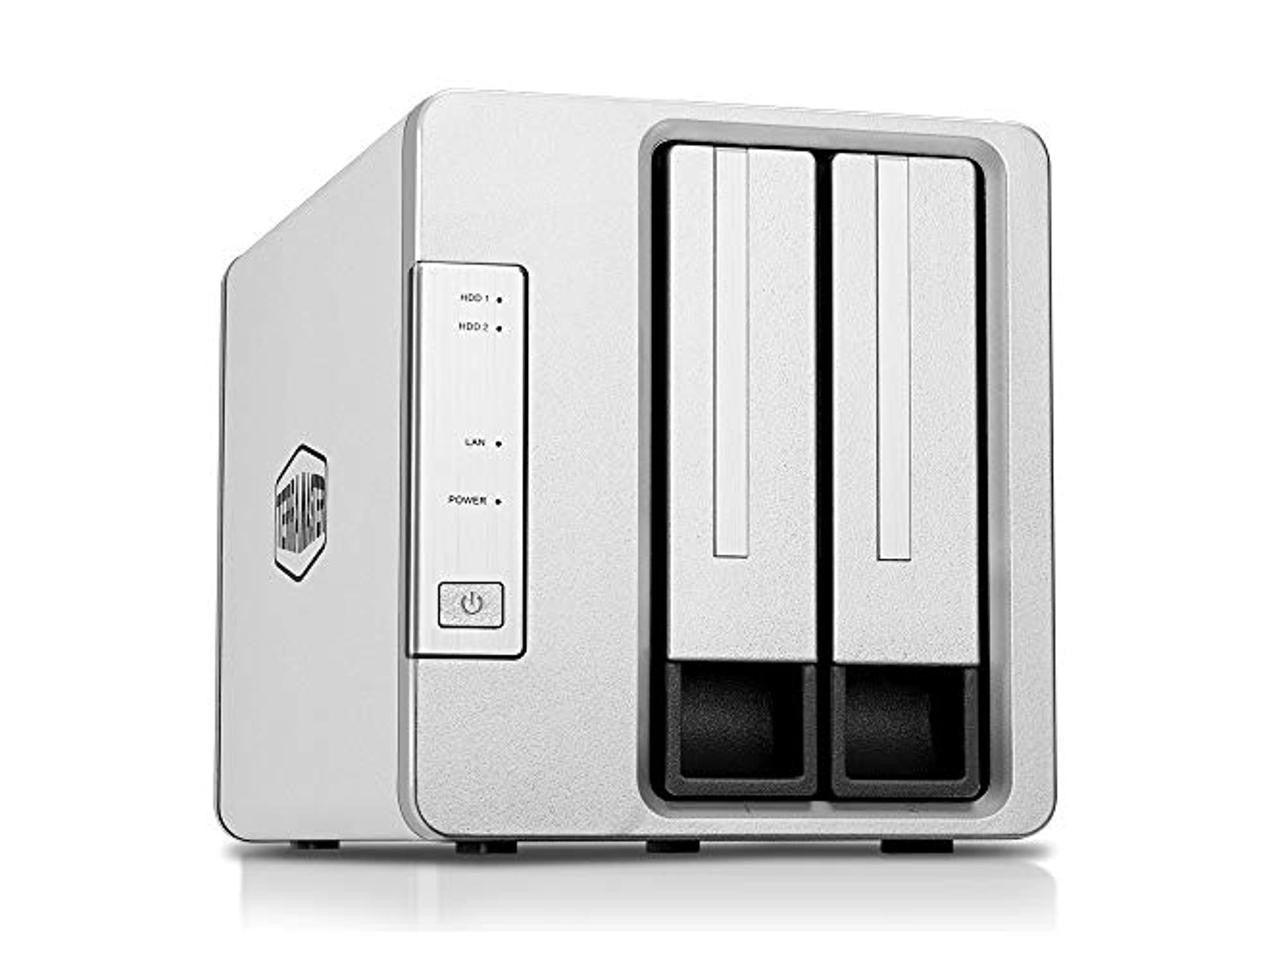 TerraMaster F2-210 2-Bay Home NAS with 16TB (2 x 8TB) of Western Digital Red Plus Drives Fully Assembled and Tested